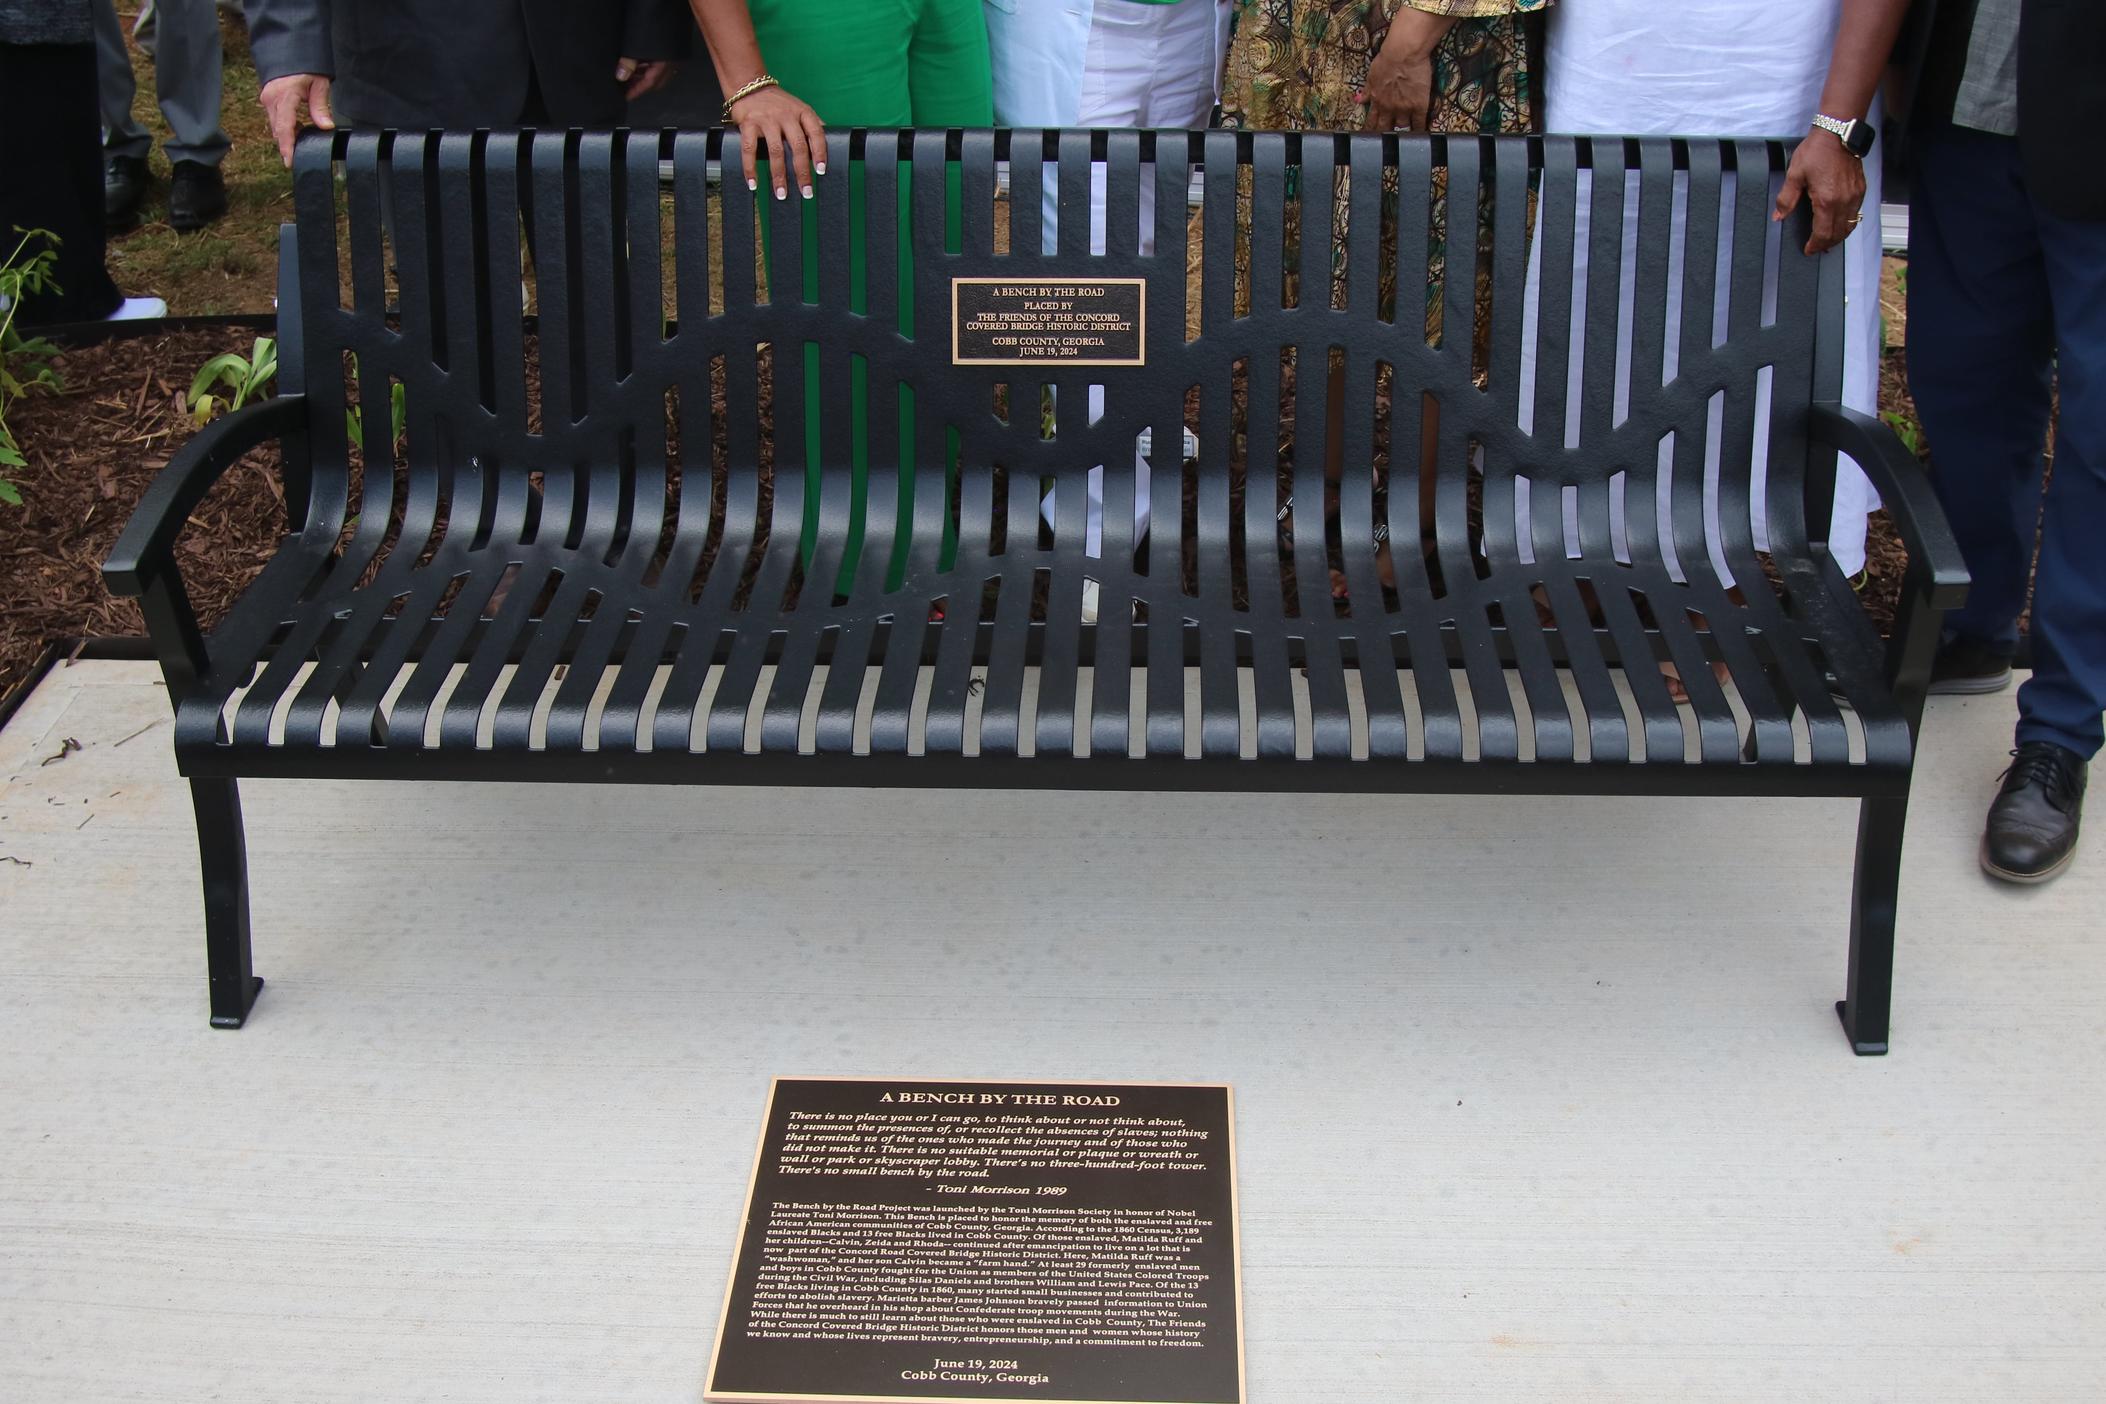 The newest "Bench by the Road" installation at Silver Comet Trail in Mableton, Georgia, honors the legacy of historic black author Toni Morrison and a Cobb County formerly enslaved family. (Friends of the Concord Bridge)